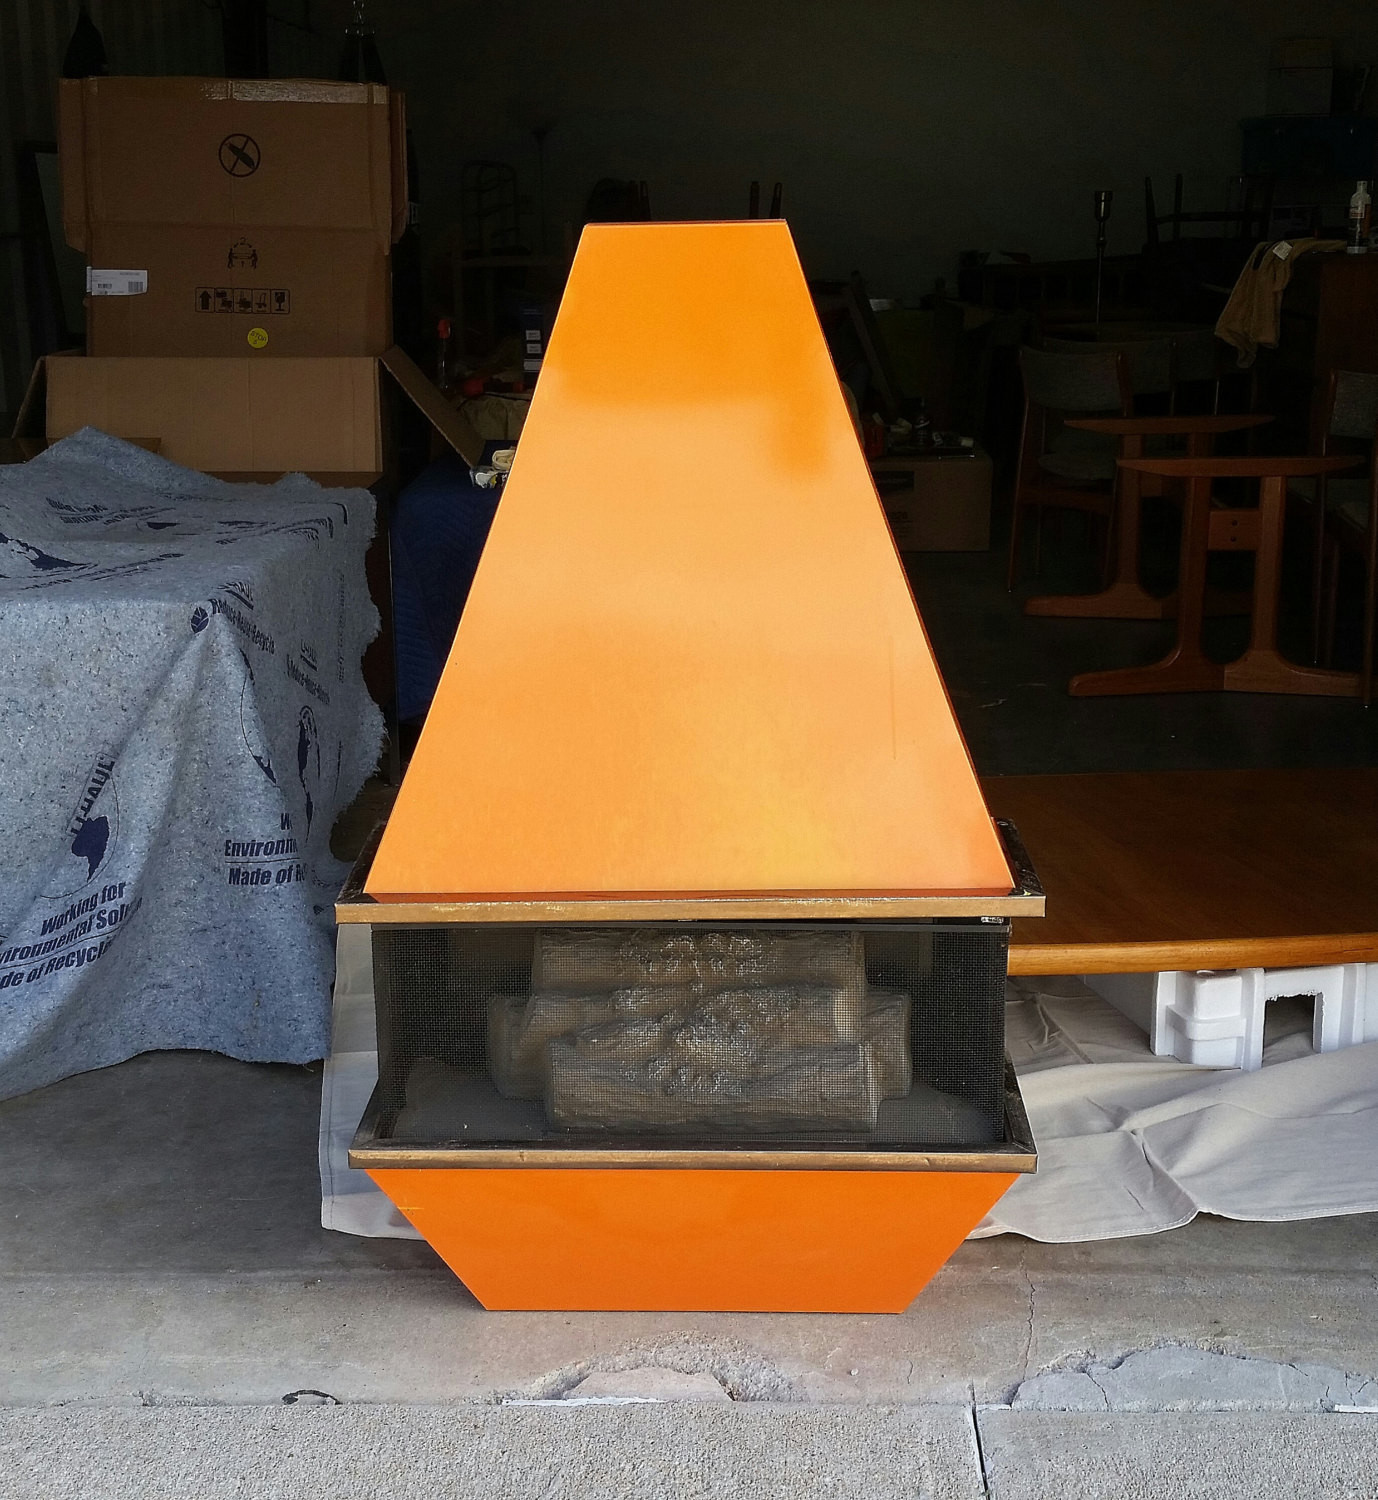 Retro Electric Fireplace
 Vintage 1970 s Electric Fireplace Space Age Mid Century